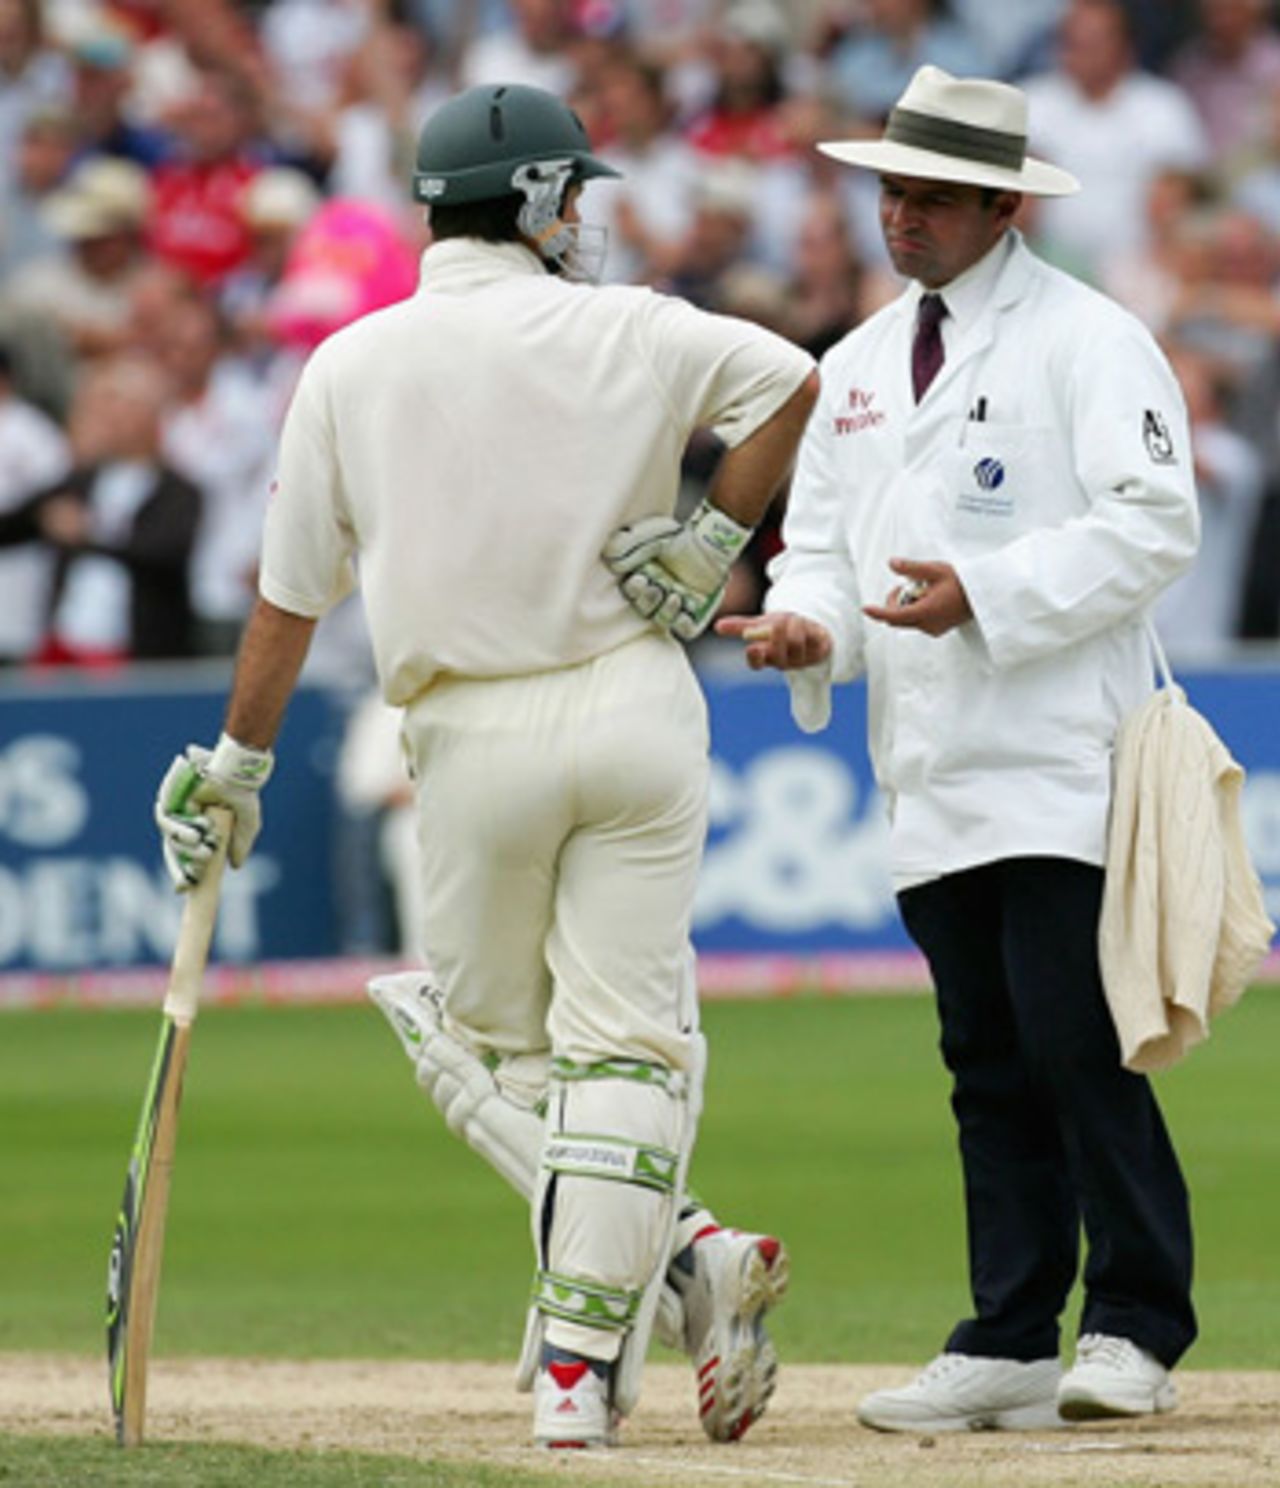 Ricky Ponting discusses his run-out with Aleem Dar.  Ponting was brilliantly run out by a substitute fielder, Gary Pratt, England v Australia, Trent Bridge, August 27, 2005